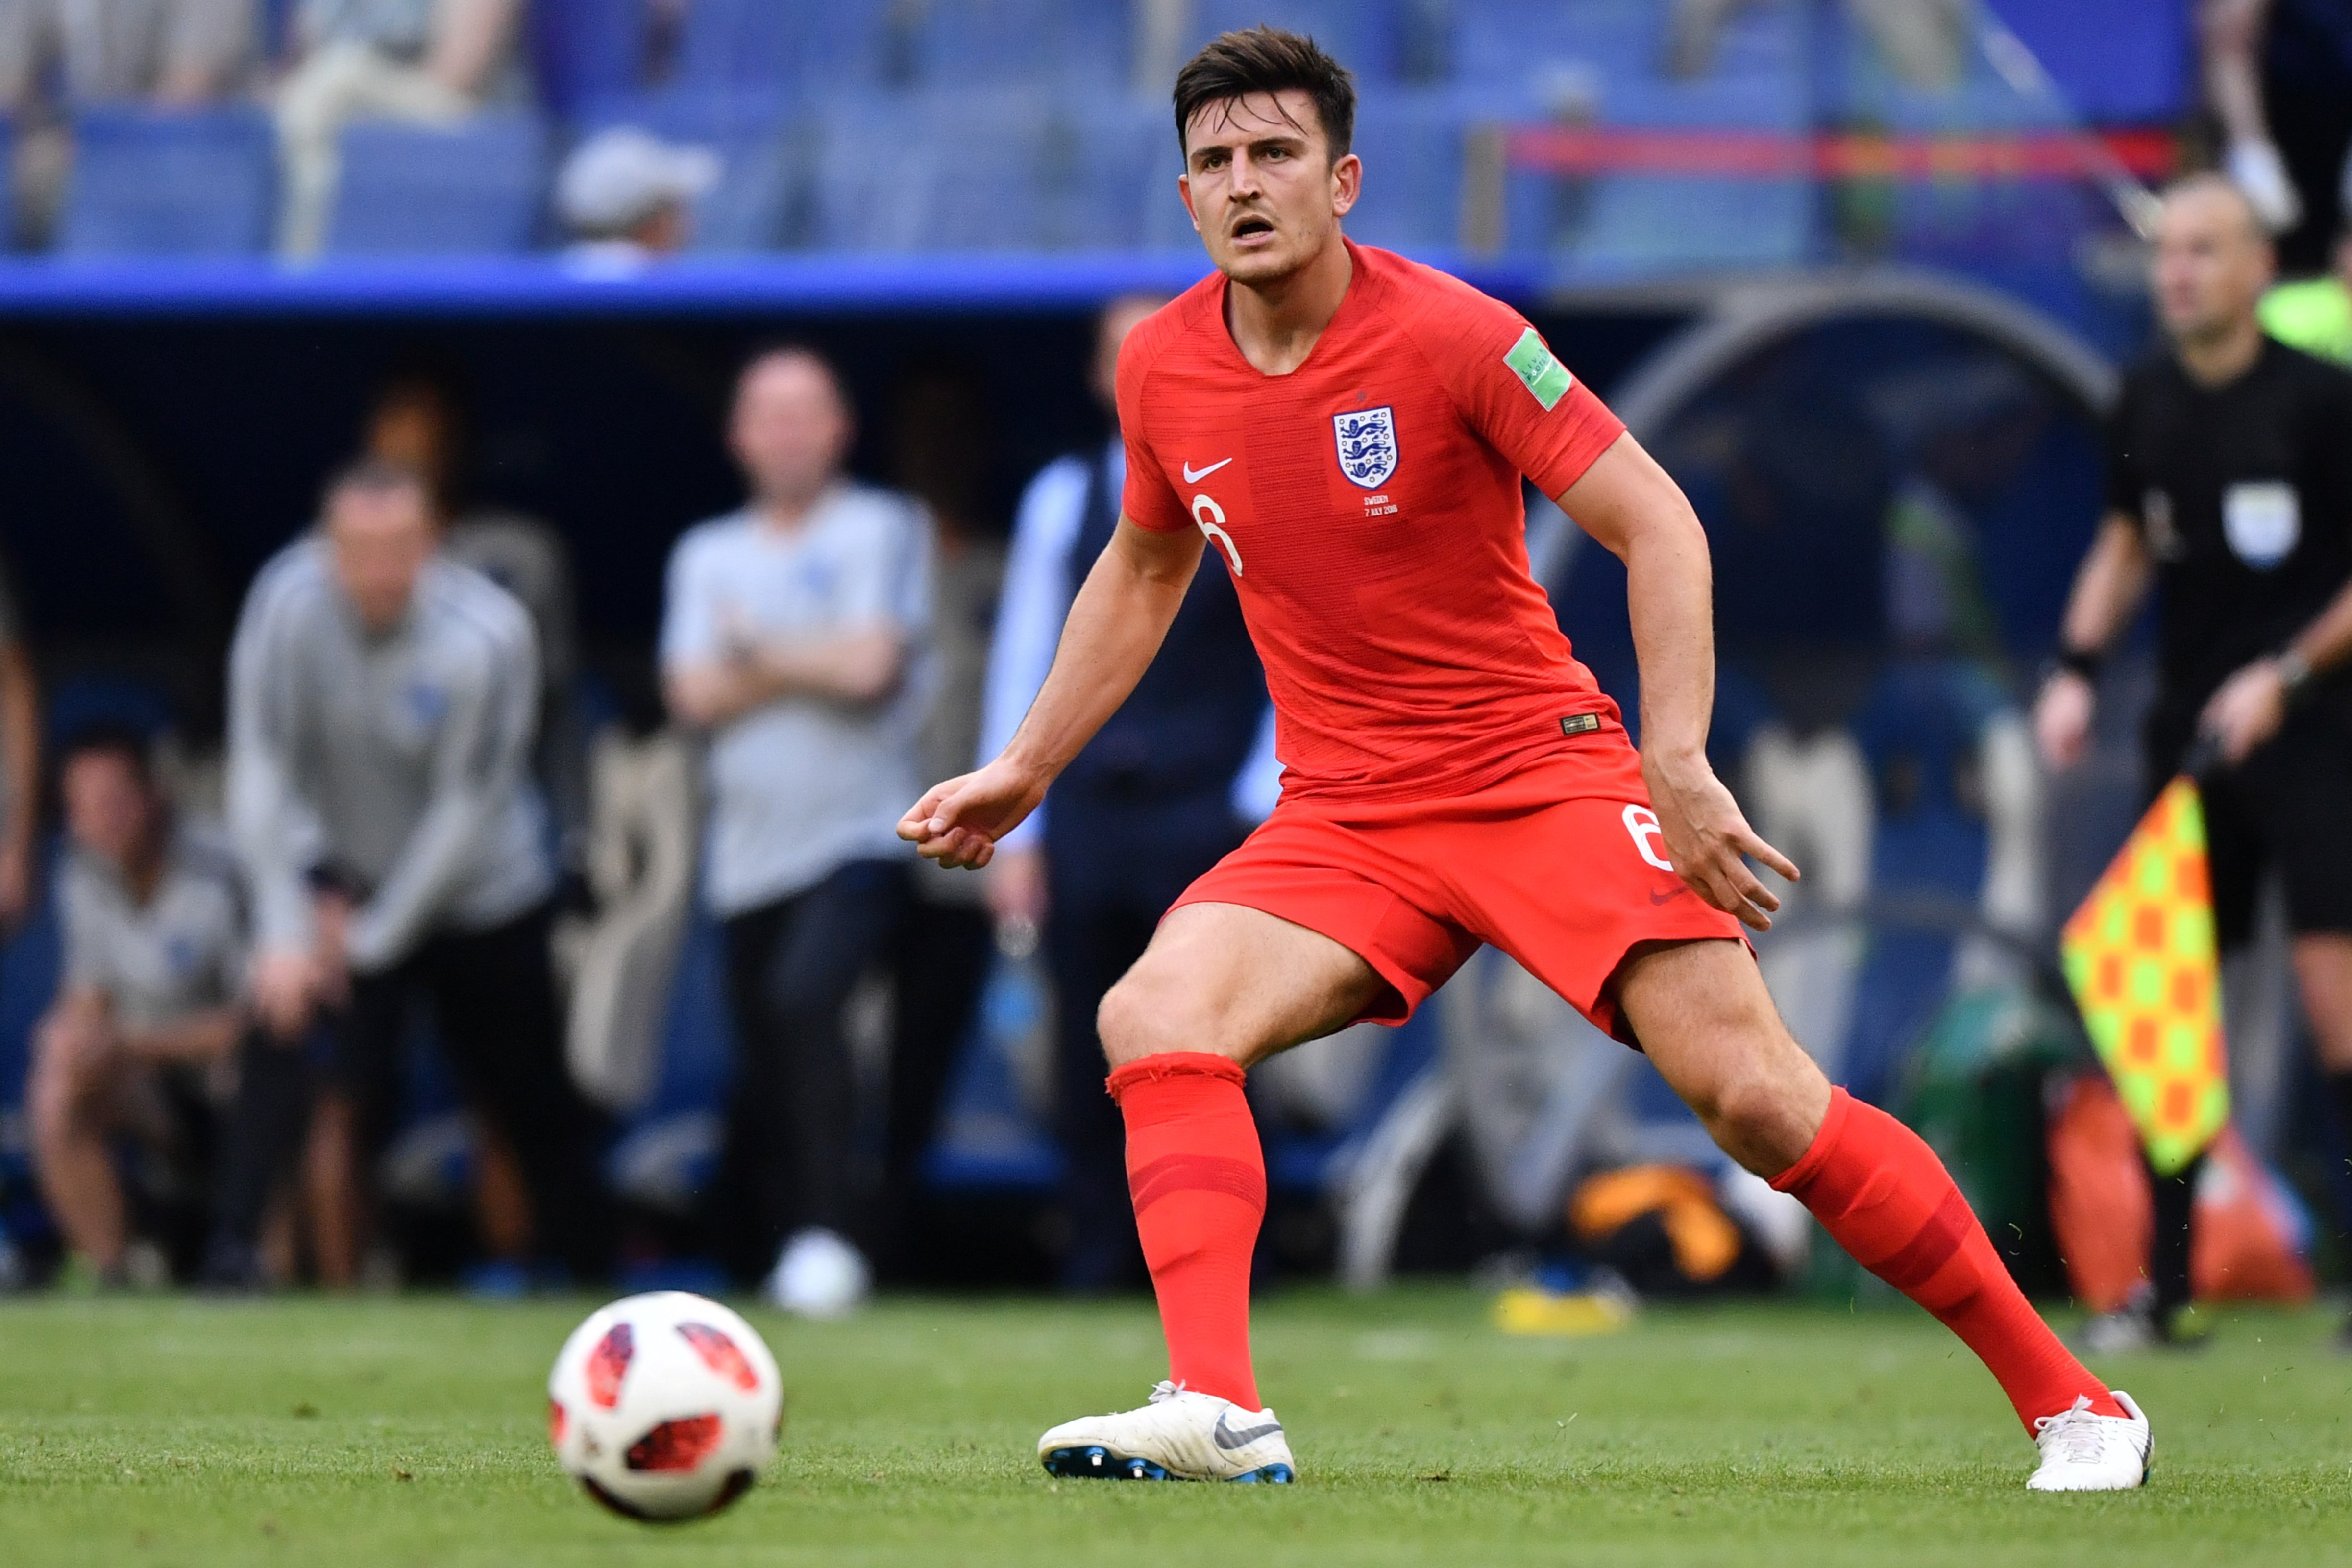 England's defender Harry Maguire drives the ball during the Russia 2018 World Cup quarter-final football match between Sweden and England at the Samara Arena in Samara on July 7, 2018. (FABRICE COFFRINI&mdash;AFP/Getty Images)